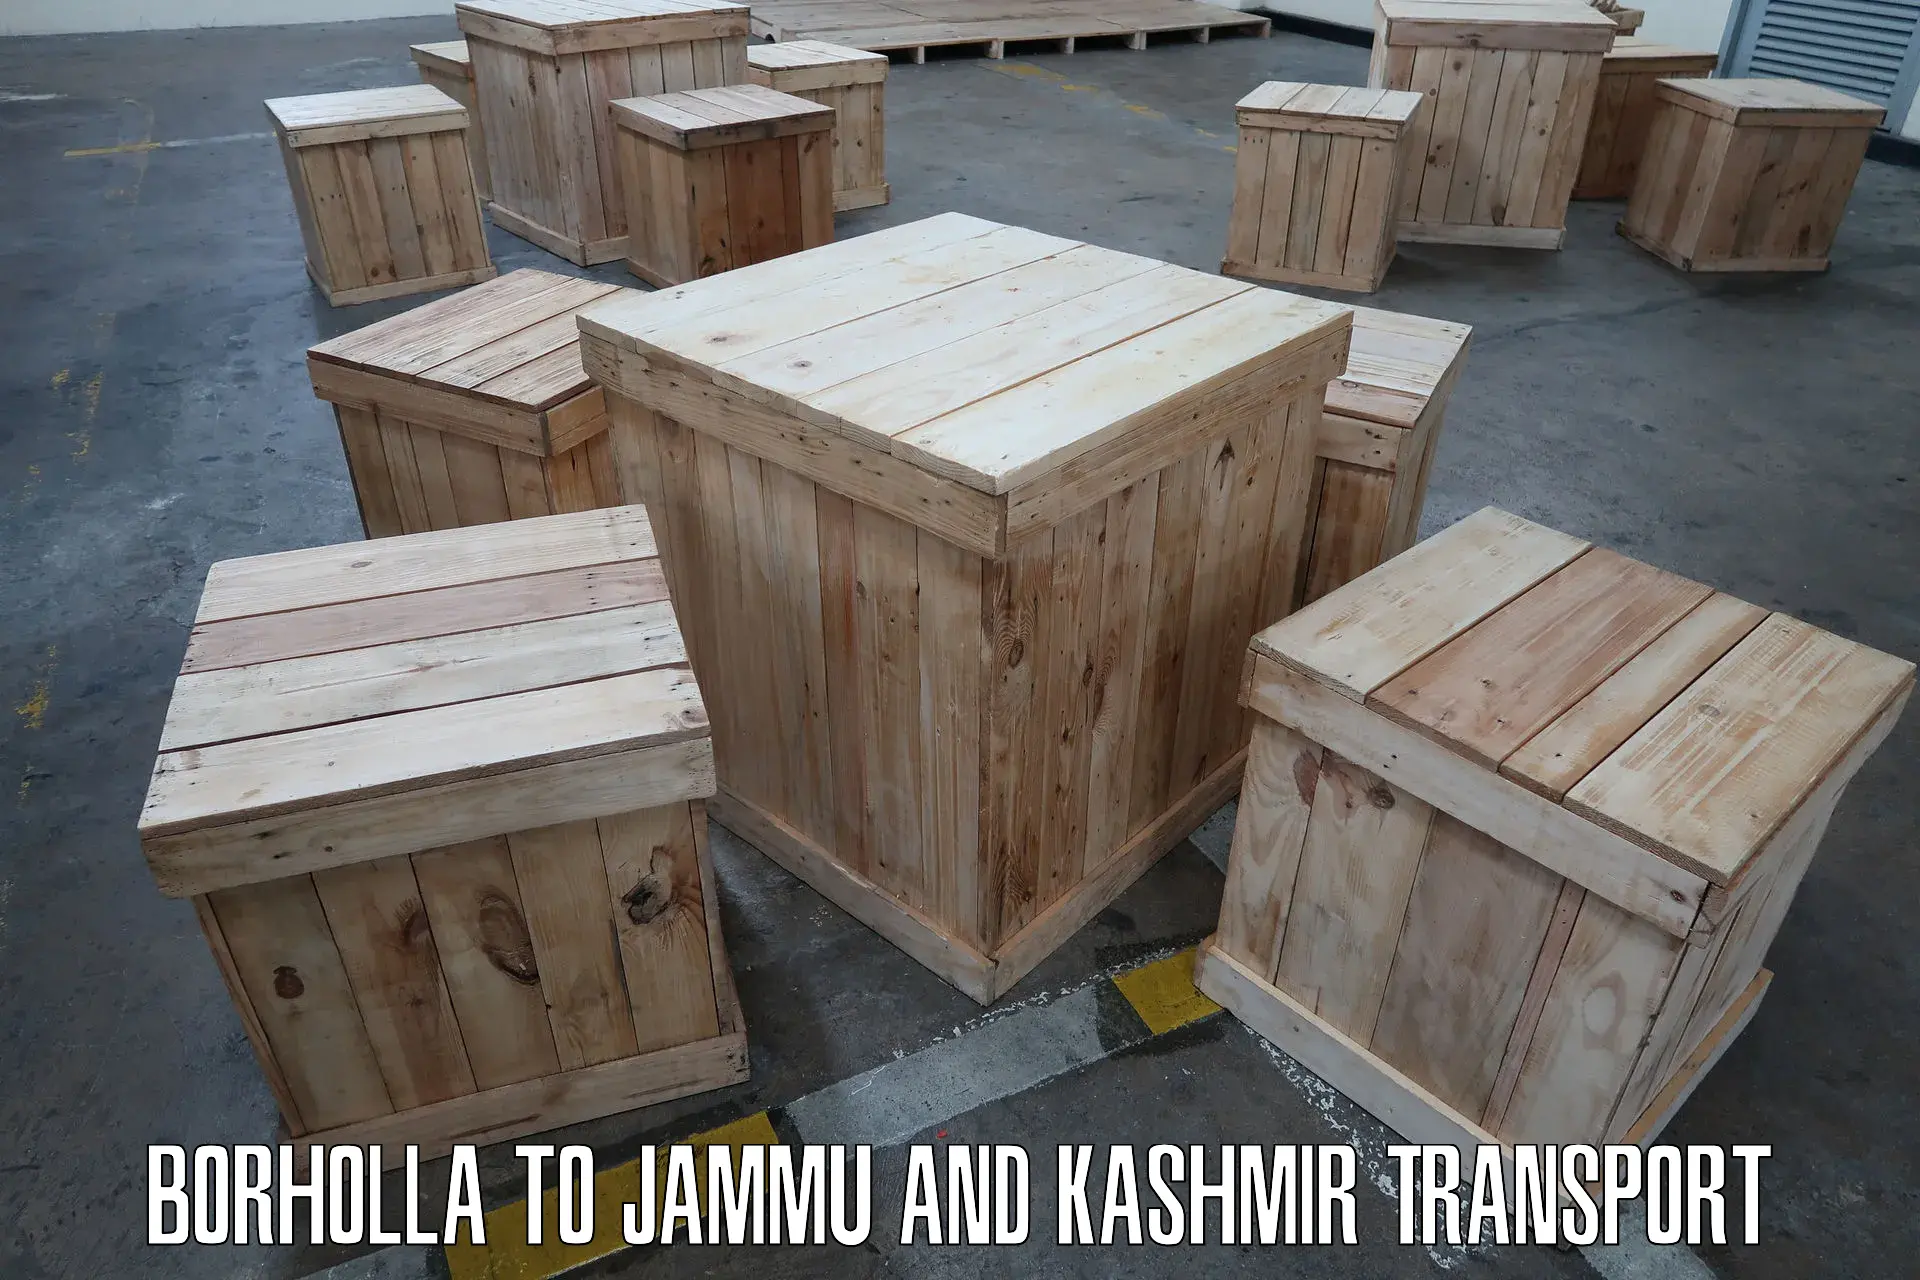 Nearby transport service Borholla to Jammu and Kashmir